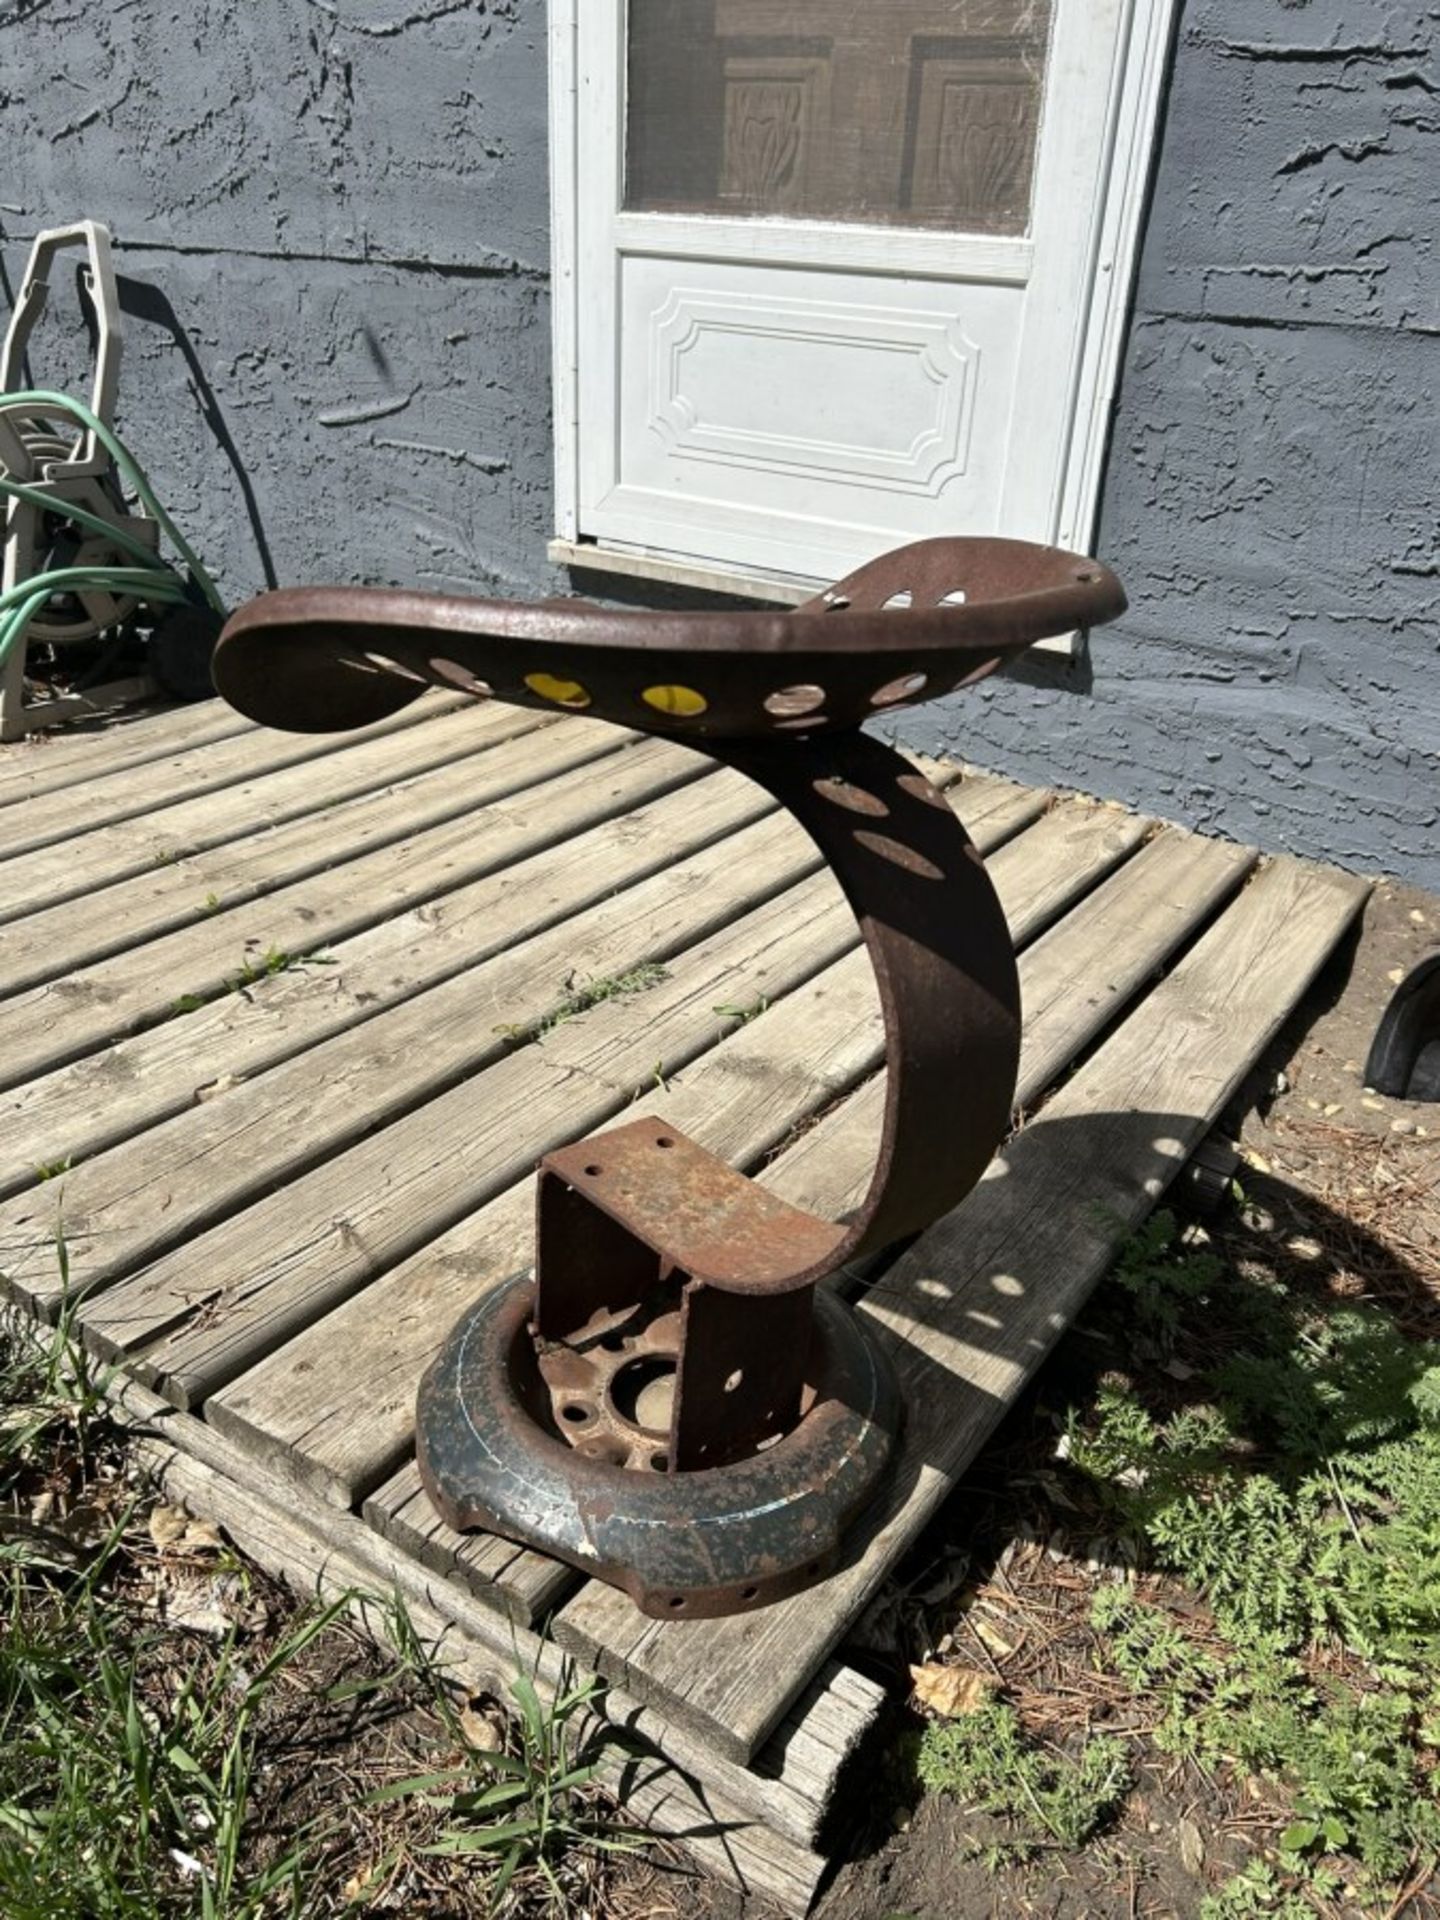 ANTIQUE IMPLEMENT SEAT - Image 4 of 5